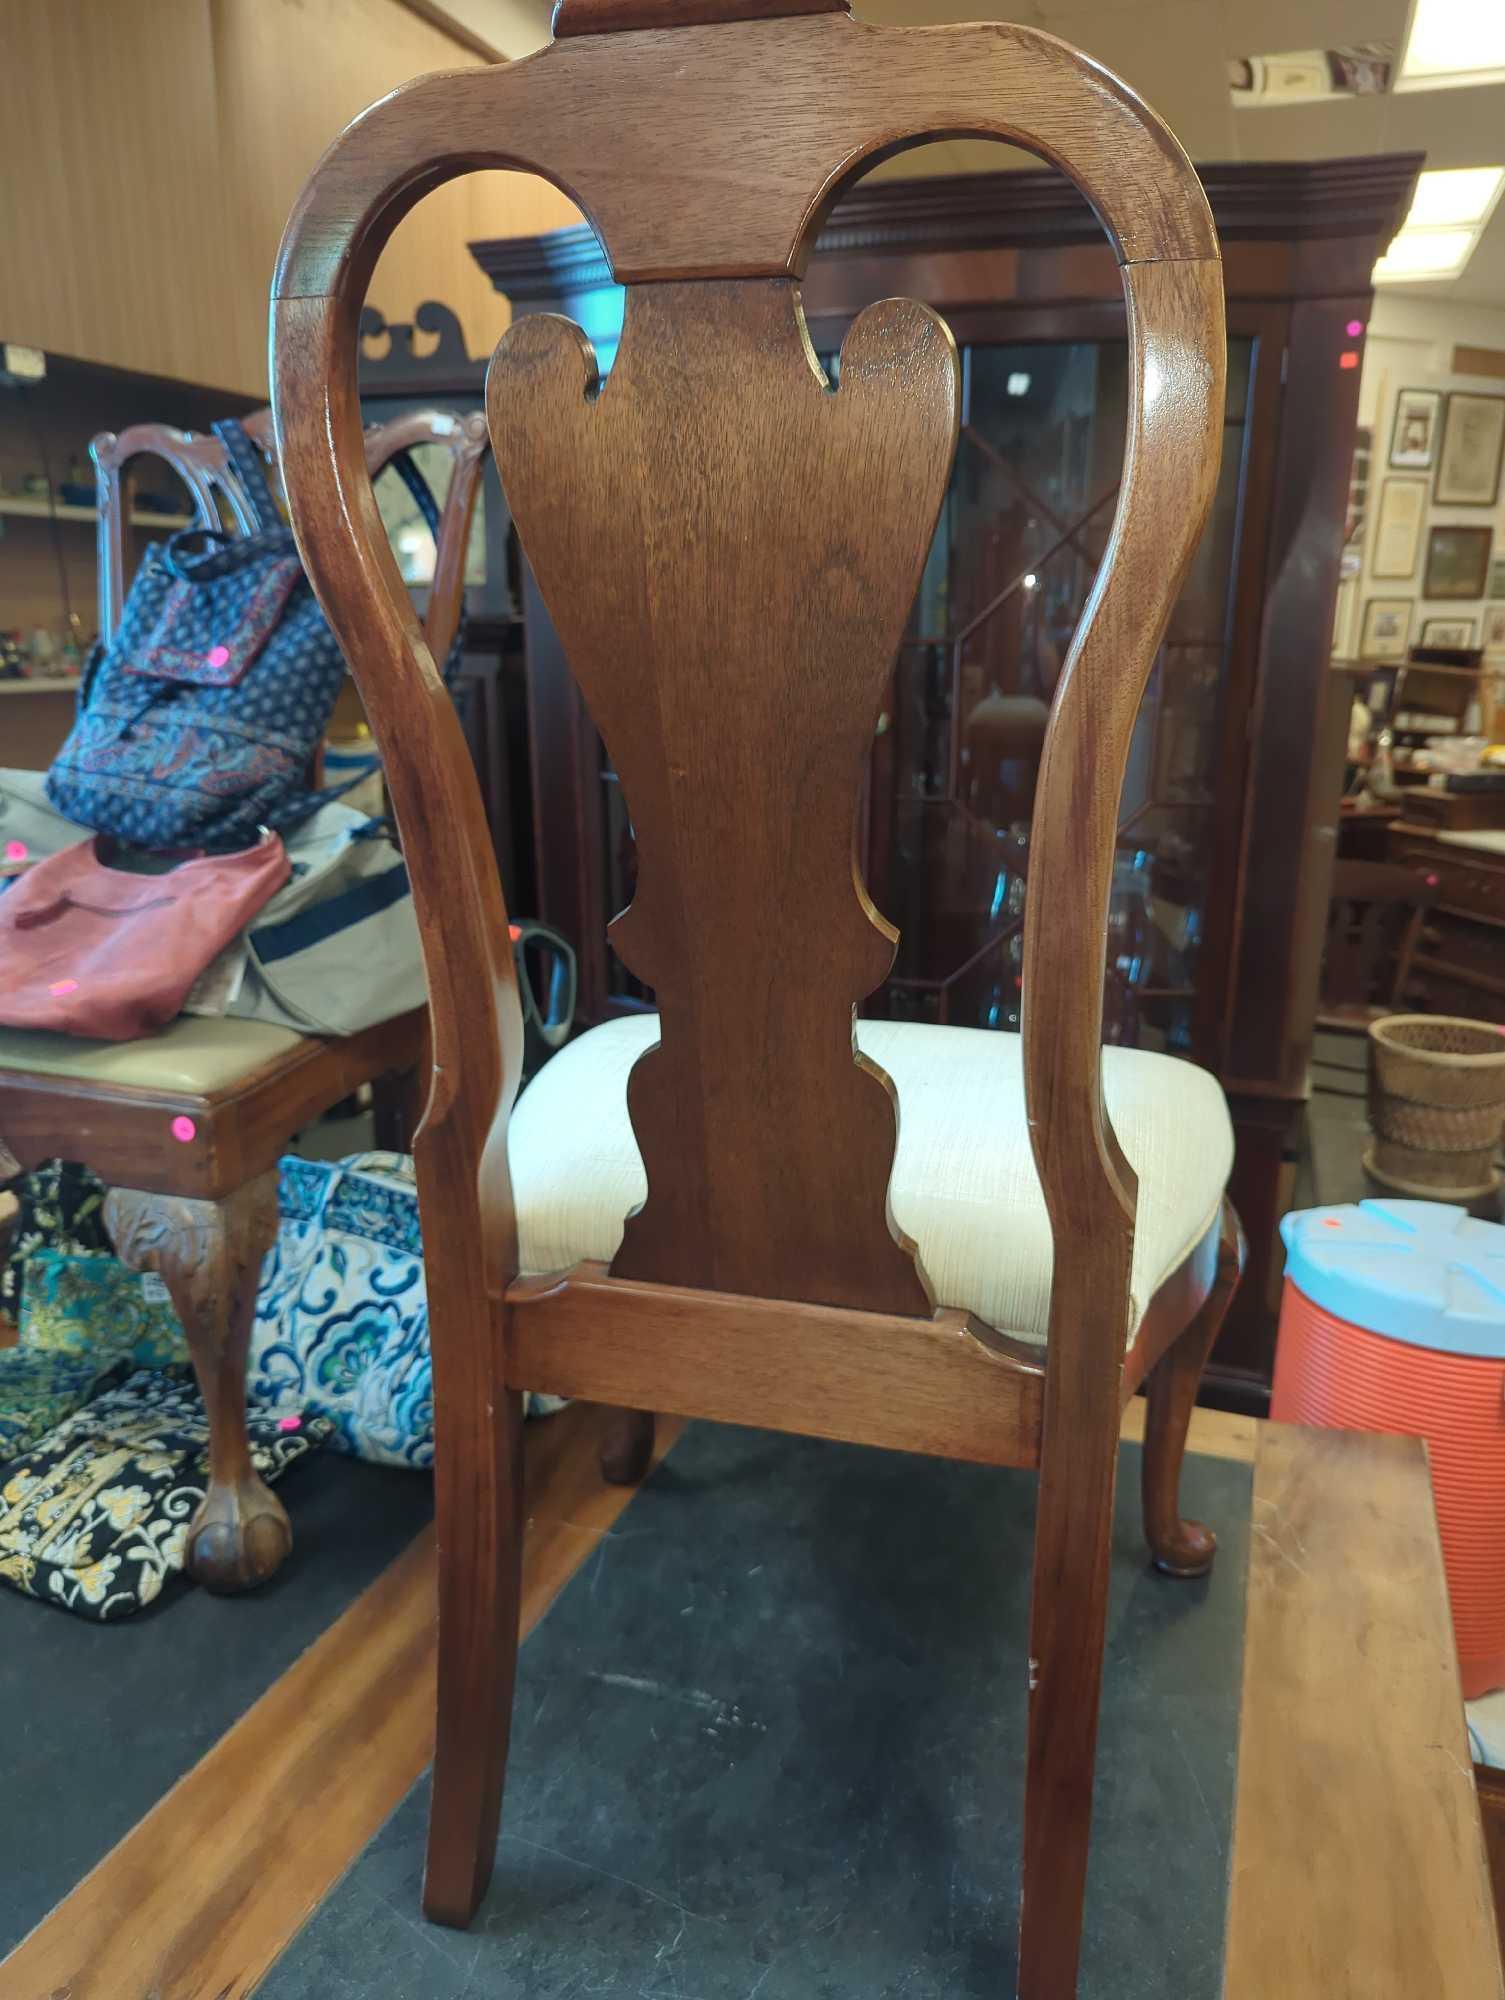 Queen Anne Style Splat Back Dinning Chair, Approximate Dimensions - 41" H x 22" D x 23" W, Appears